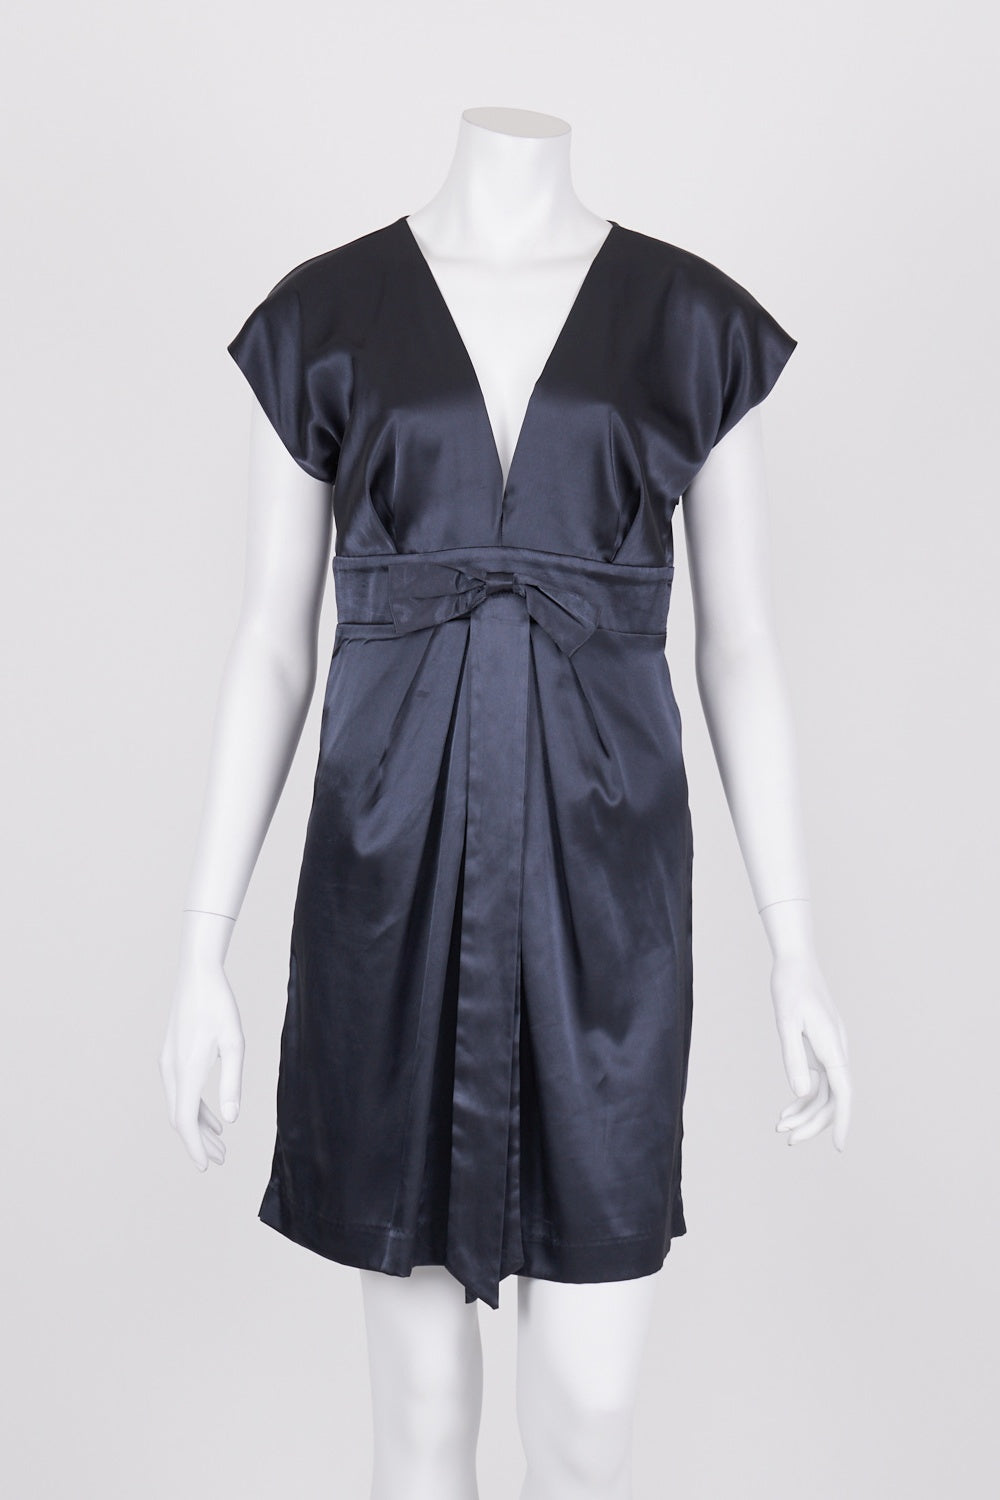 Cooper St Bow Front Satin Dress 12